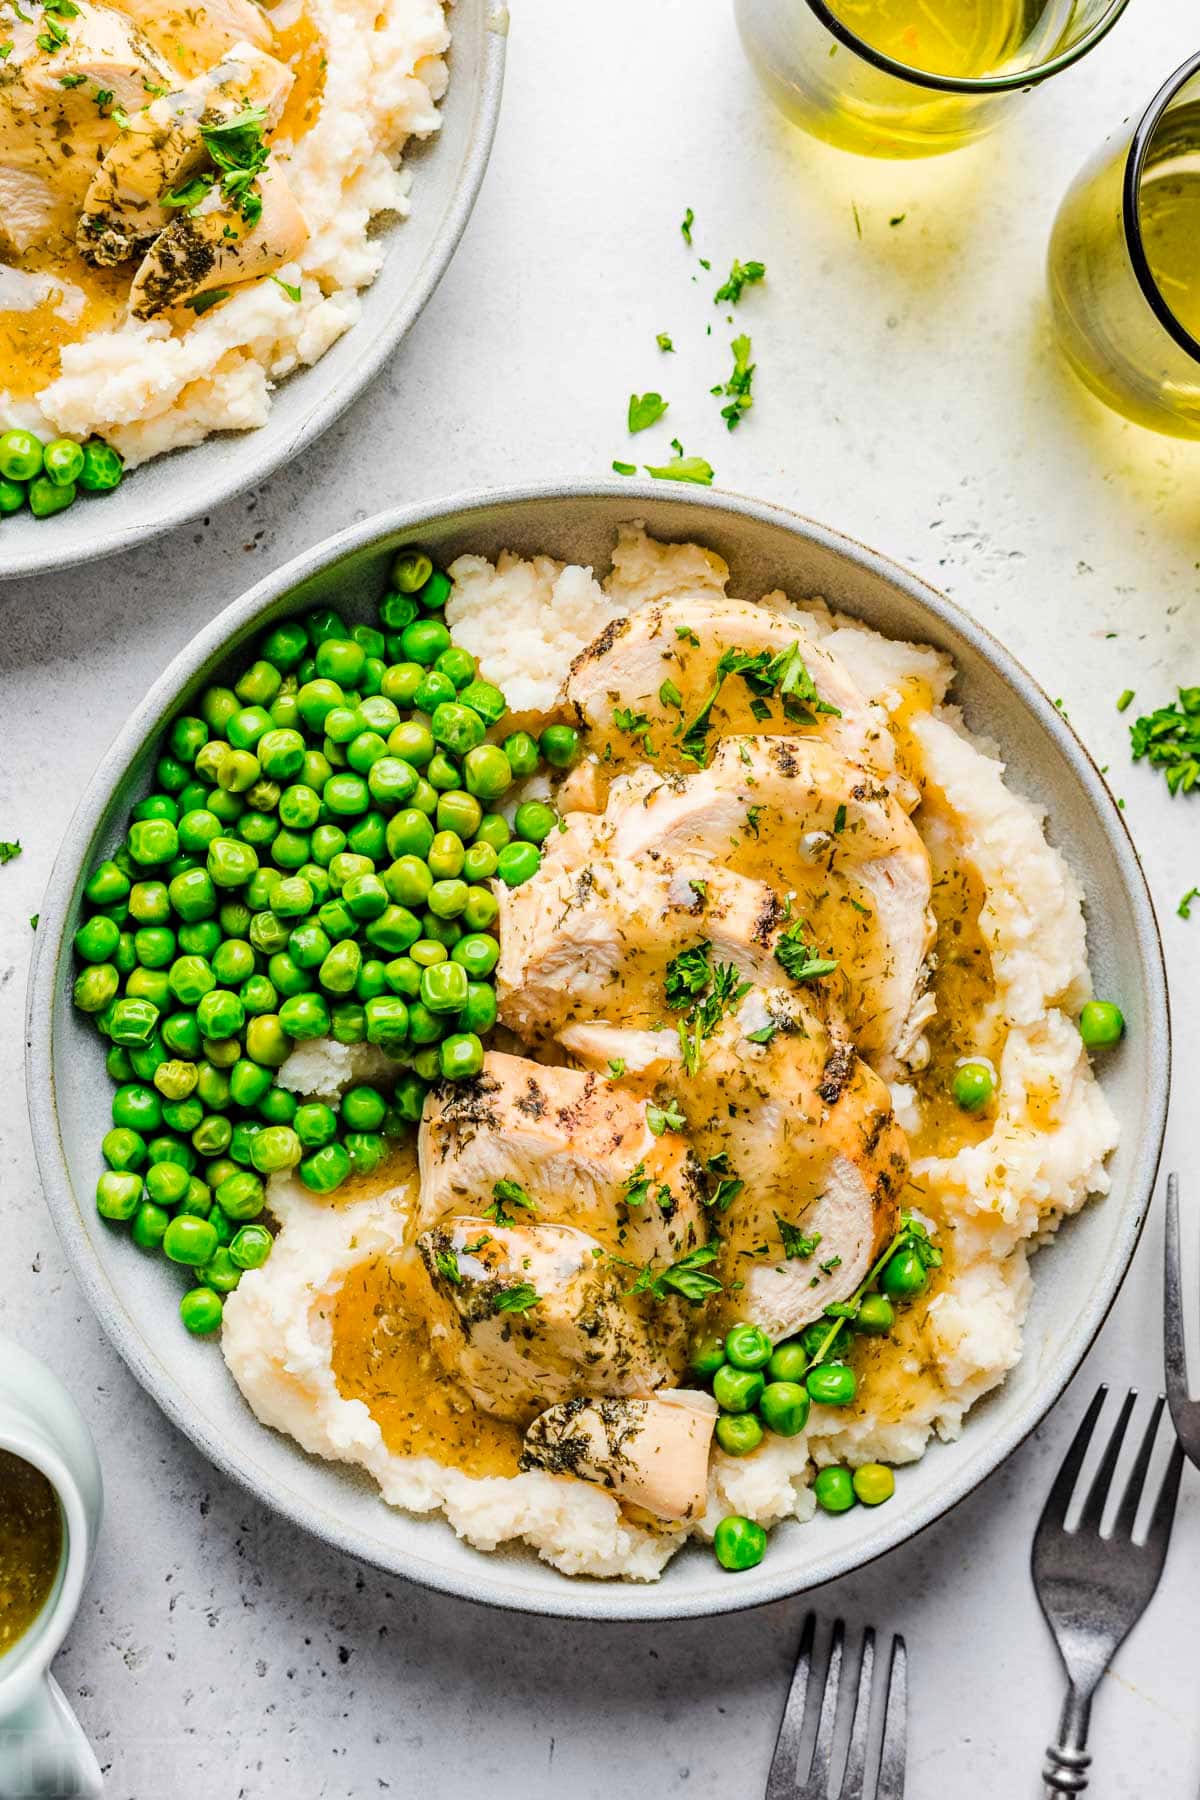 top down look at instant pot chicken breast sliced sitting on a bed of mashed potatoes with gravy over the top. green peas are also on the plate.